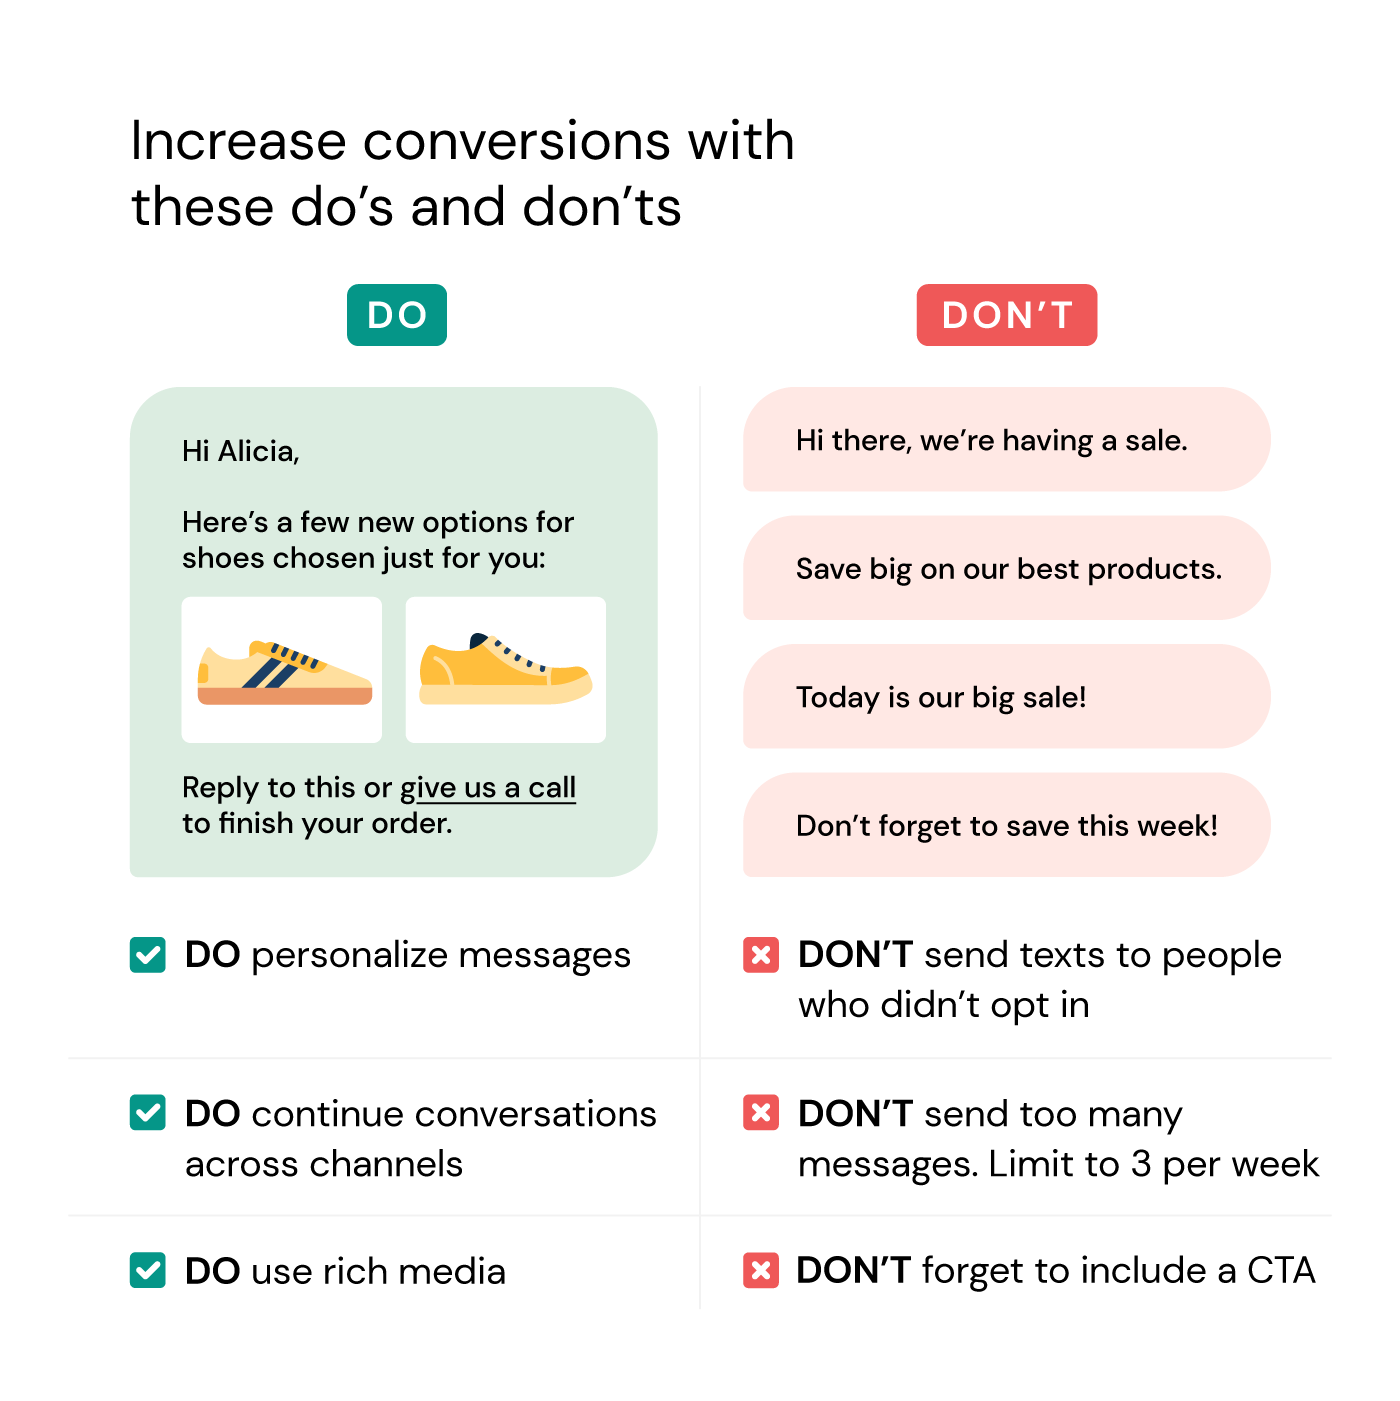 Successful SMS campaign tactics to increase conversions